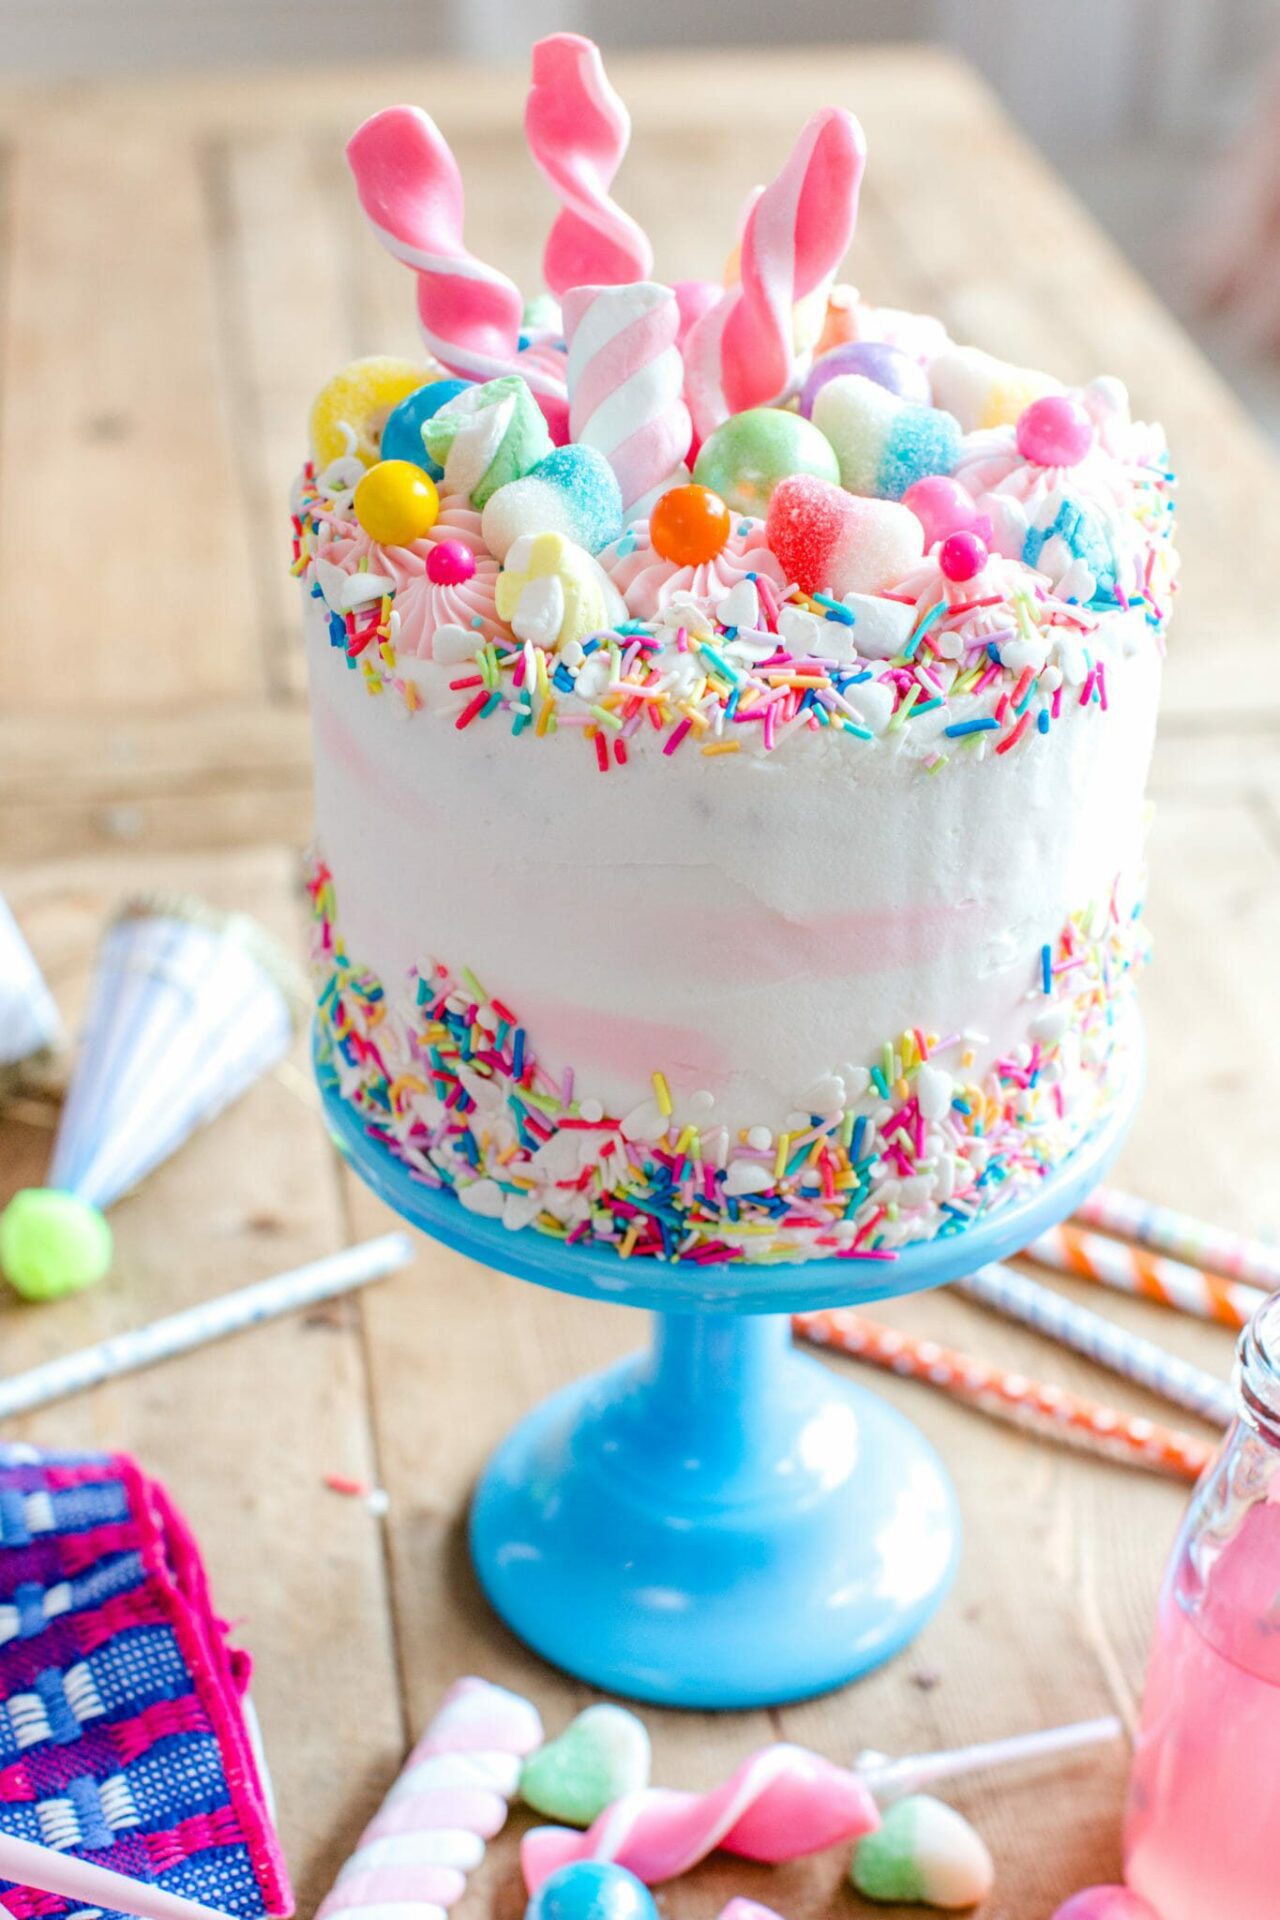 Discover the Best Cake Decorating Supplies at Love From The Oven